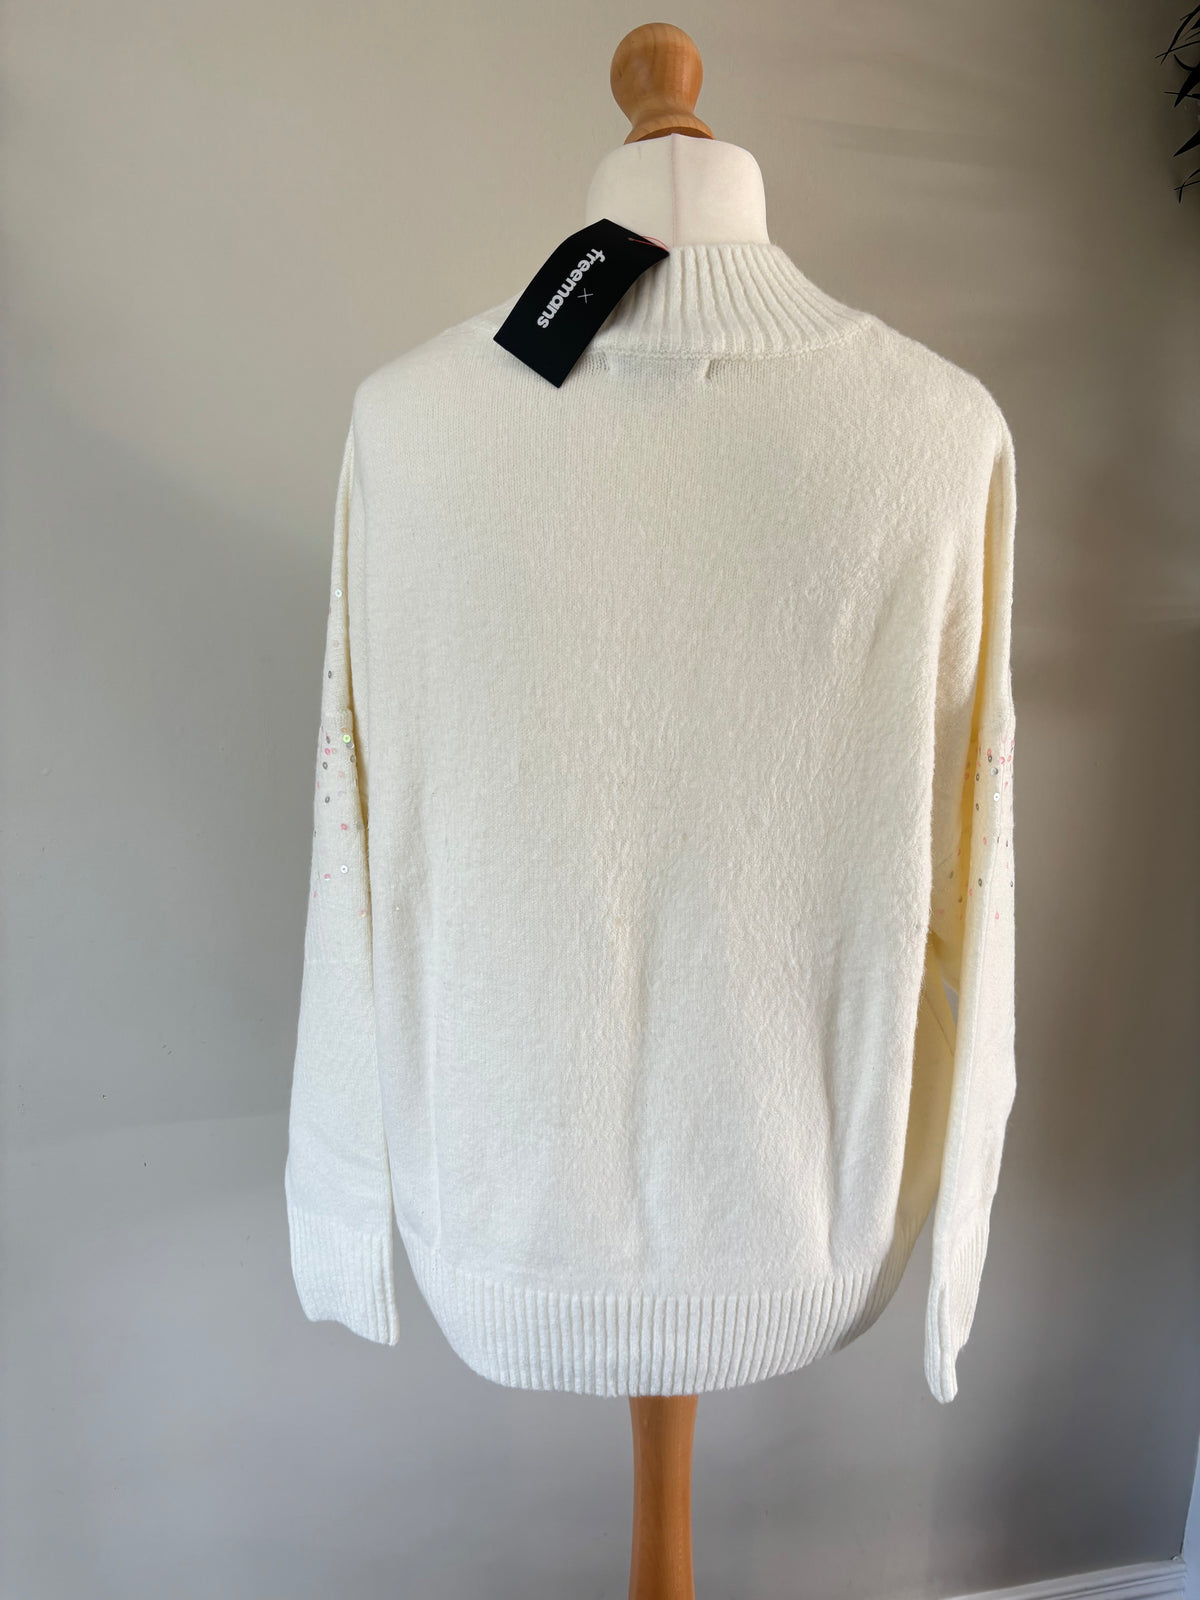 Ivory Sequin jumper by Freemans Size 16/18